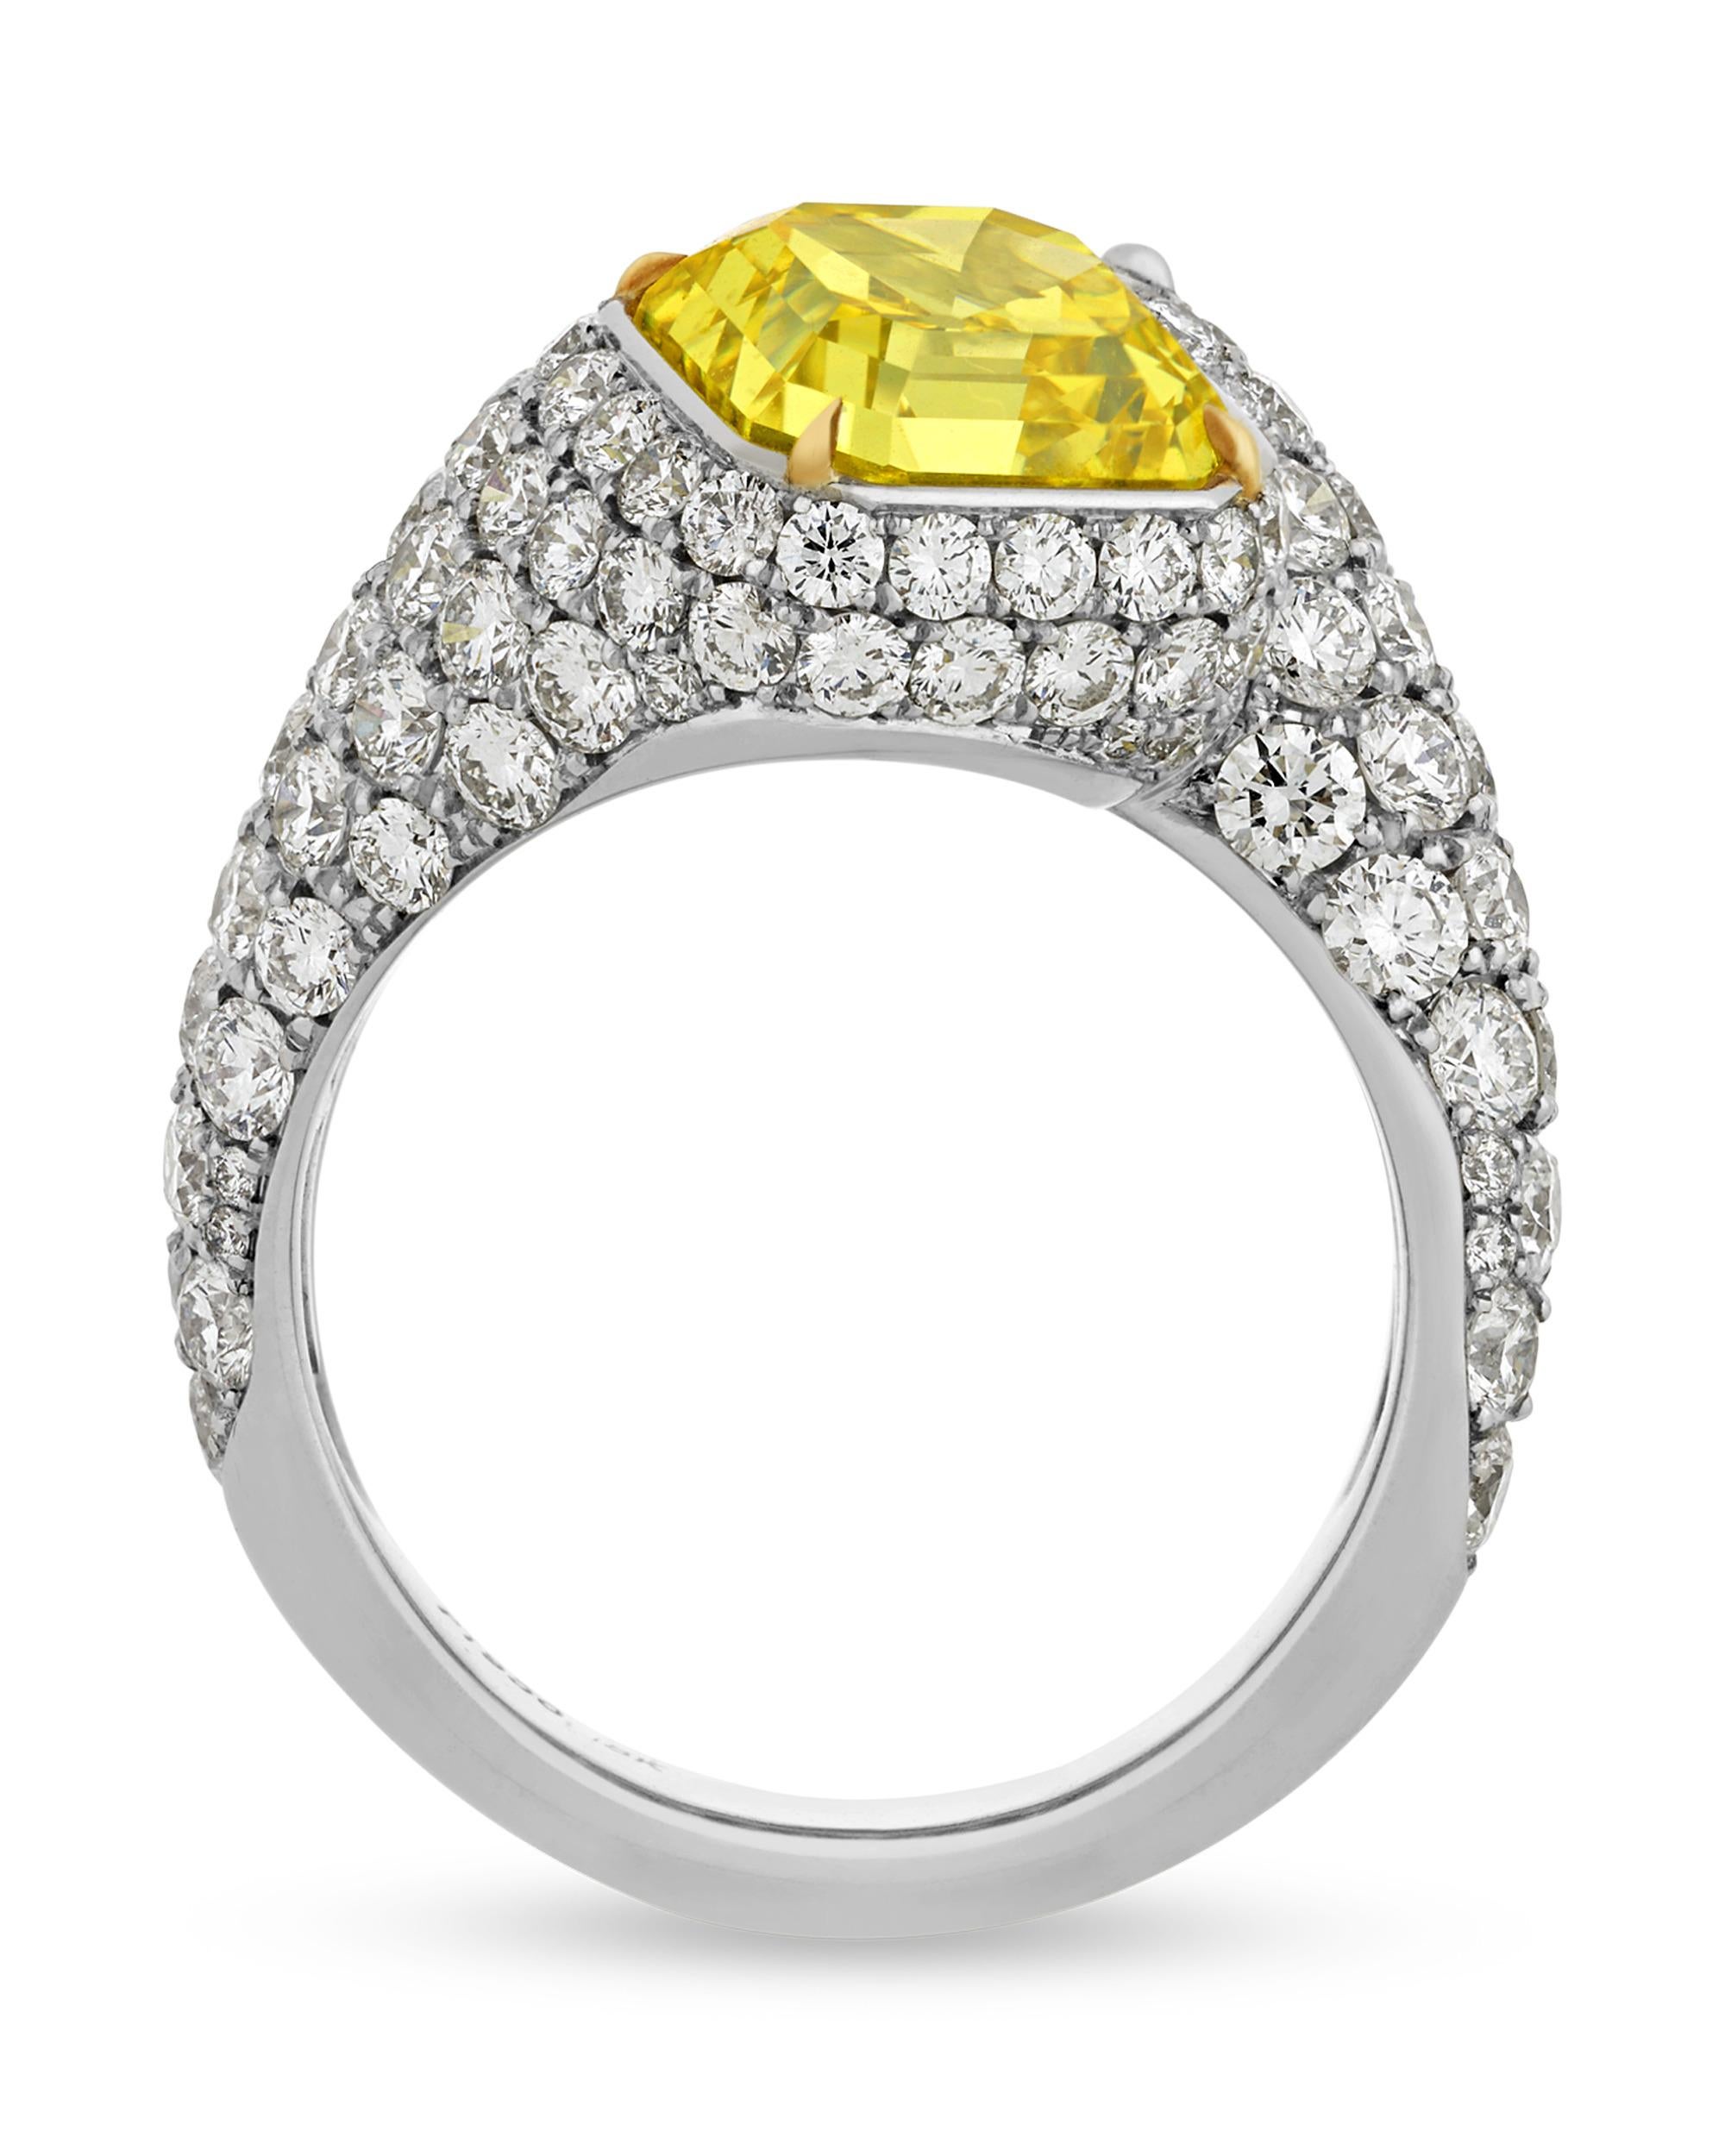 Forming an elegant bypass design, a 3.58-carat yellow diamond and a 3.03-carat white diamond find harmony in this ring. Both emerald-cut stones are certified by the Gemological Institute of America as displaying very good polish and symmetry, and